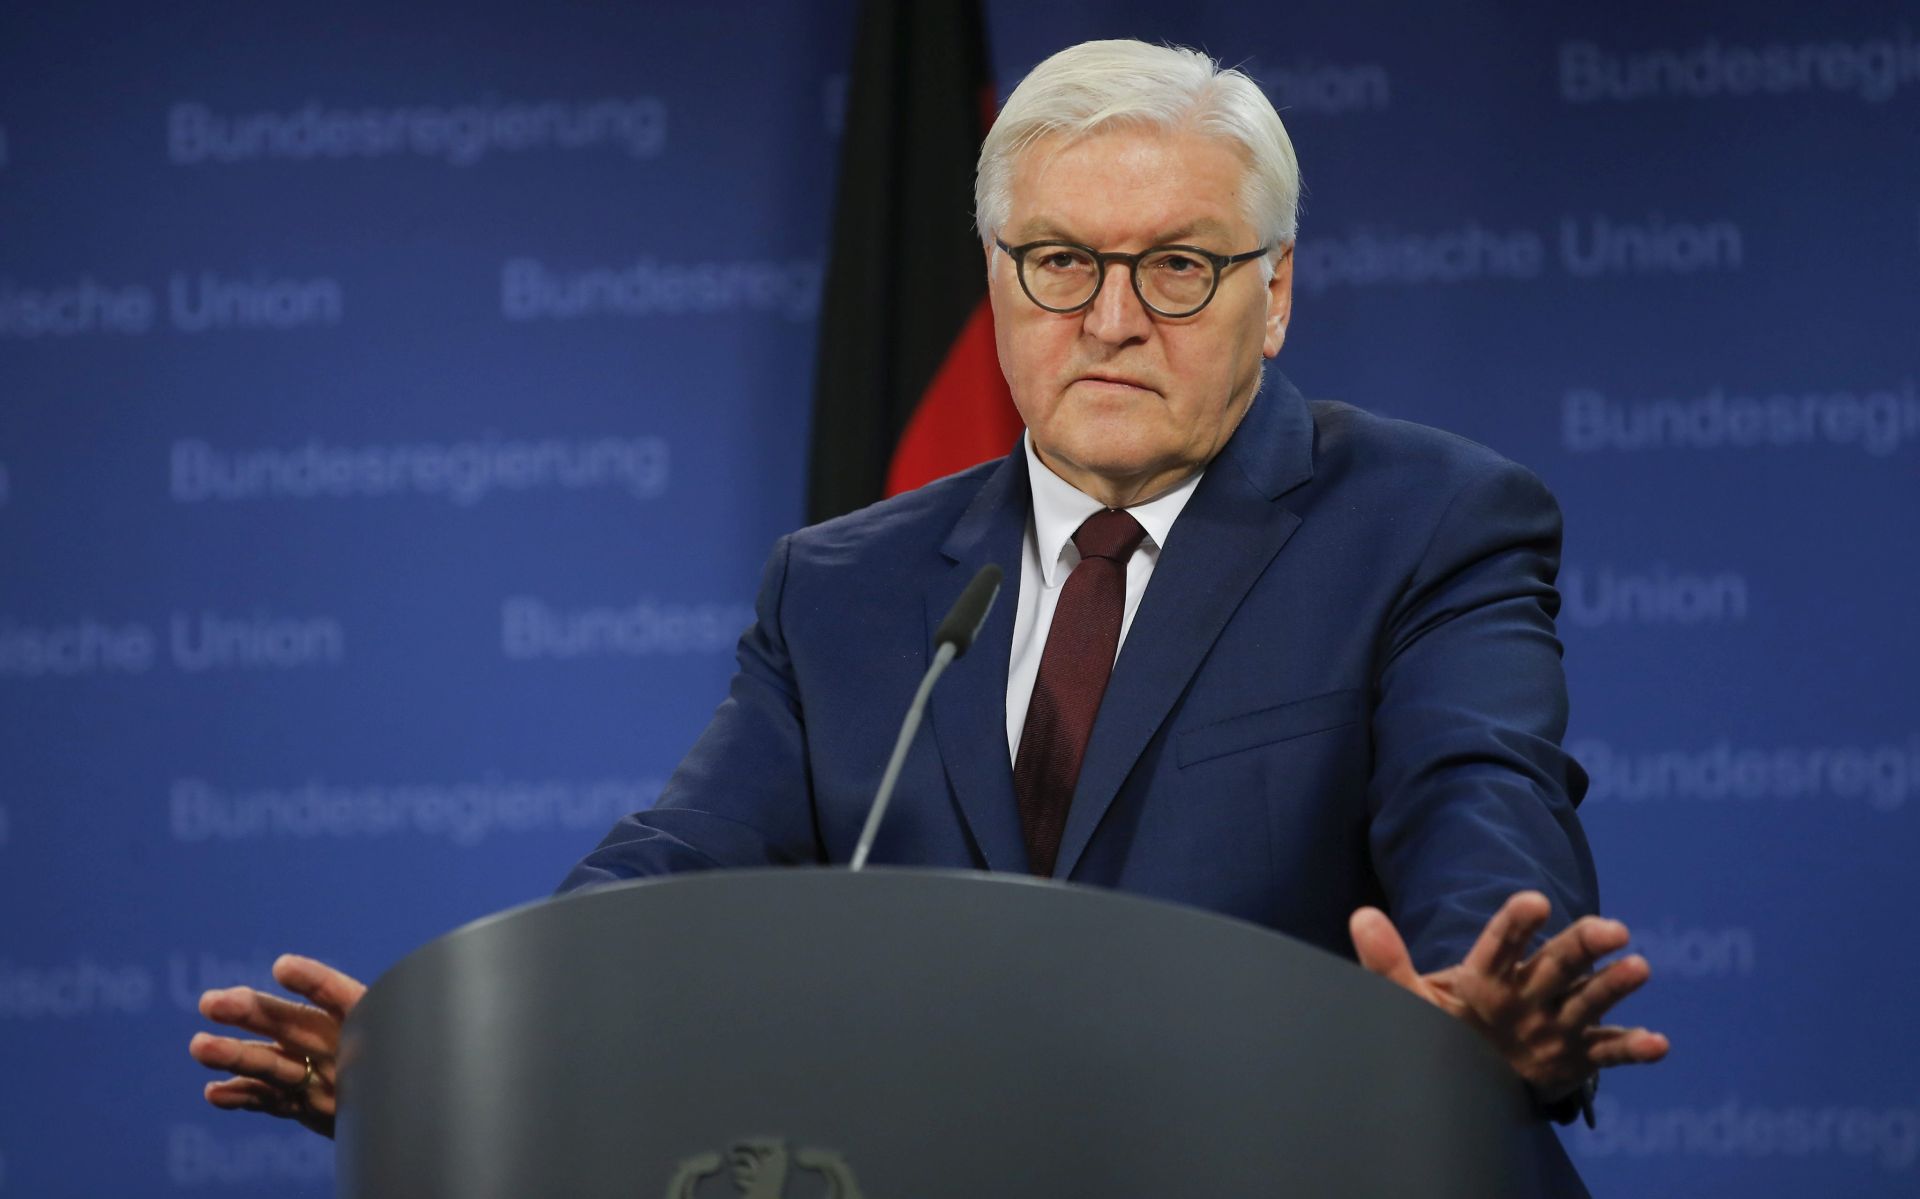 epa05672583 German Foreign Minister Frank-Walter Steinmeier gives a press briefing during an EU foreign affairs council in Brussels, Belgium, 12 December 2016.  EPA/OLIVIER HOSLET